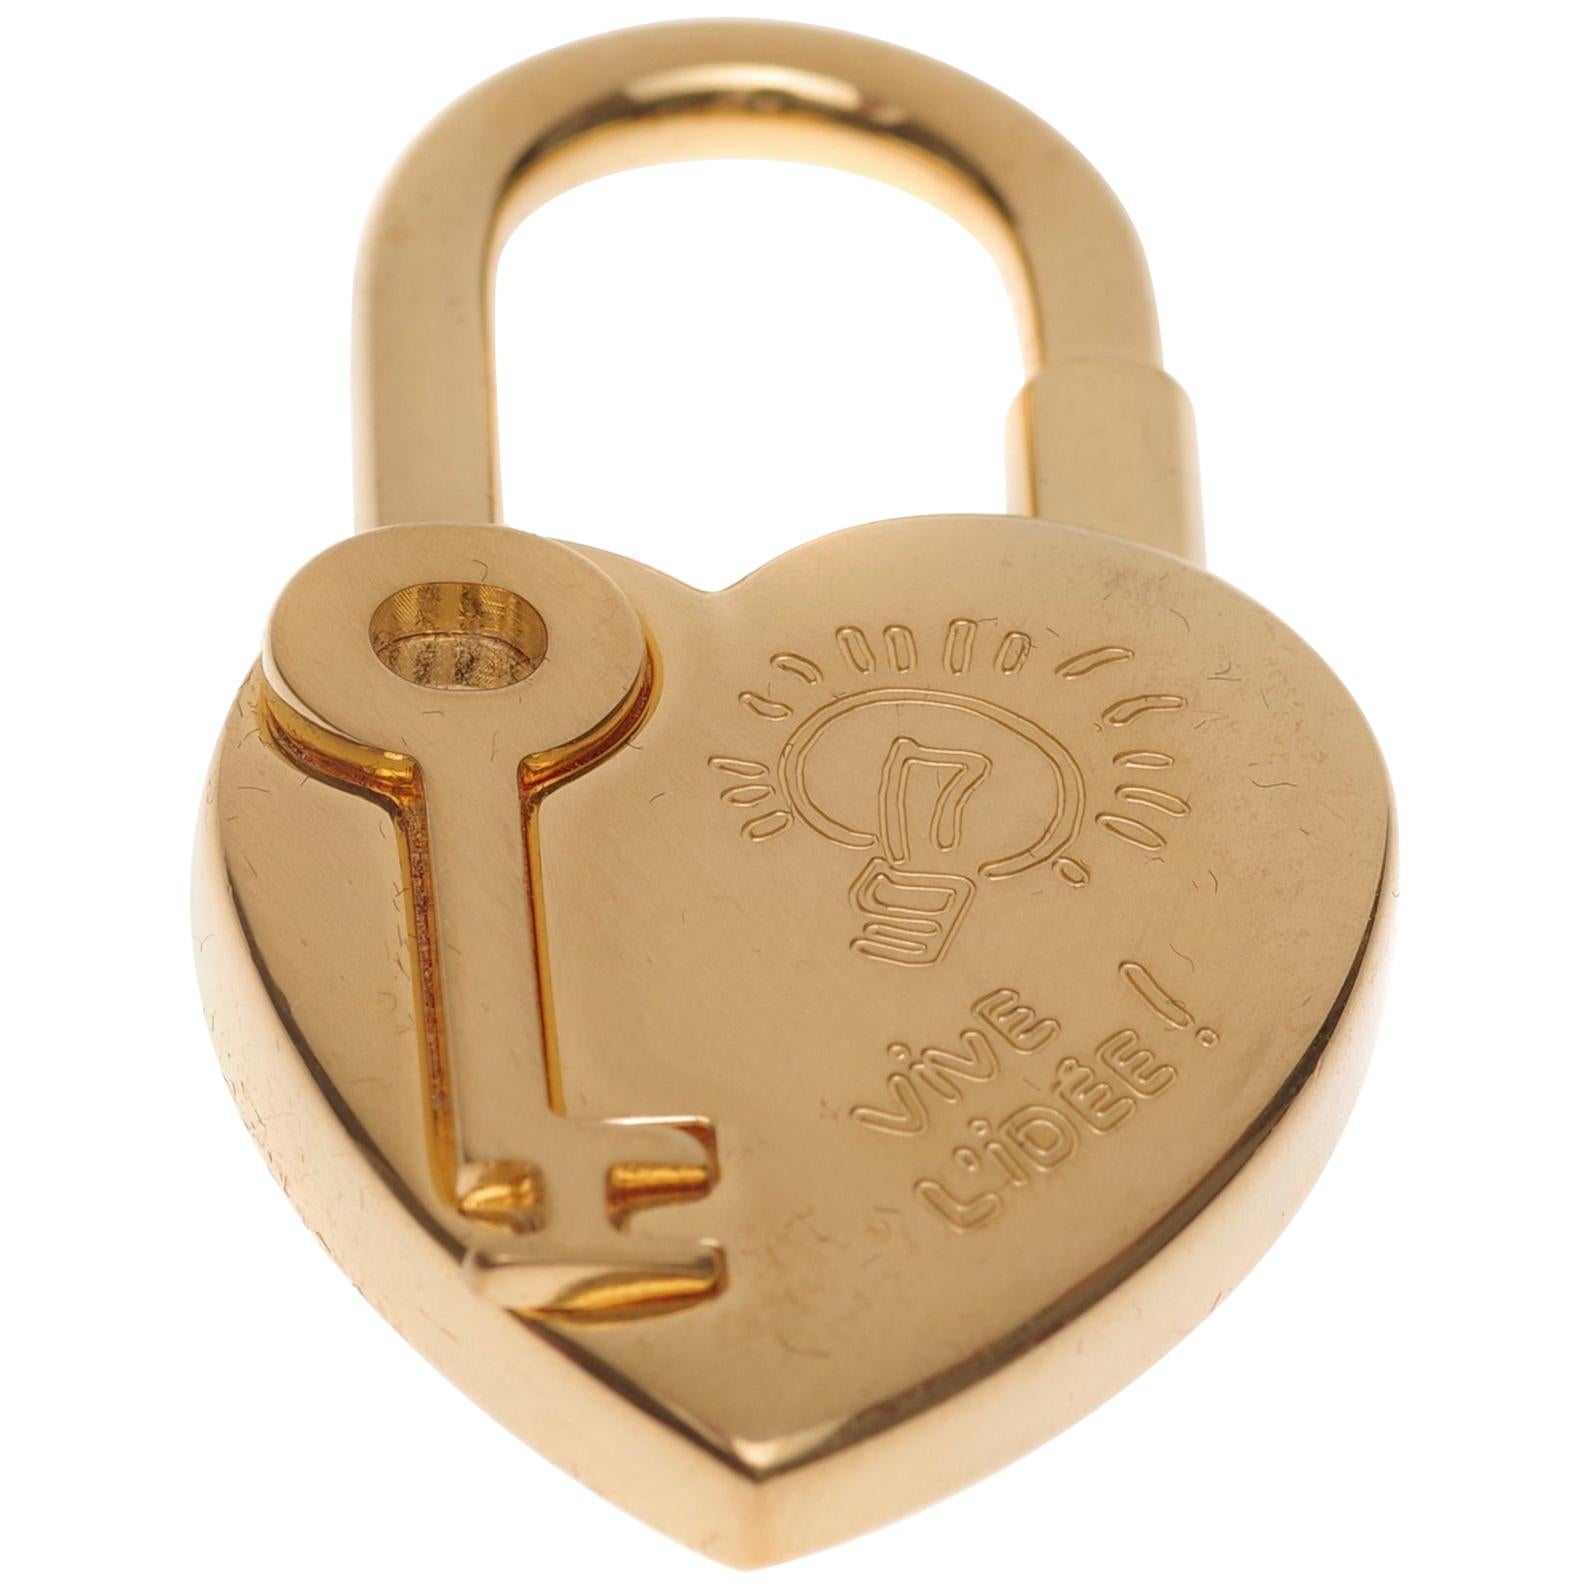 Collector Hermès Golden Padlock "Heart" for the "Year of Fantasy 2004"